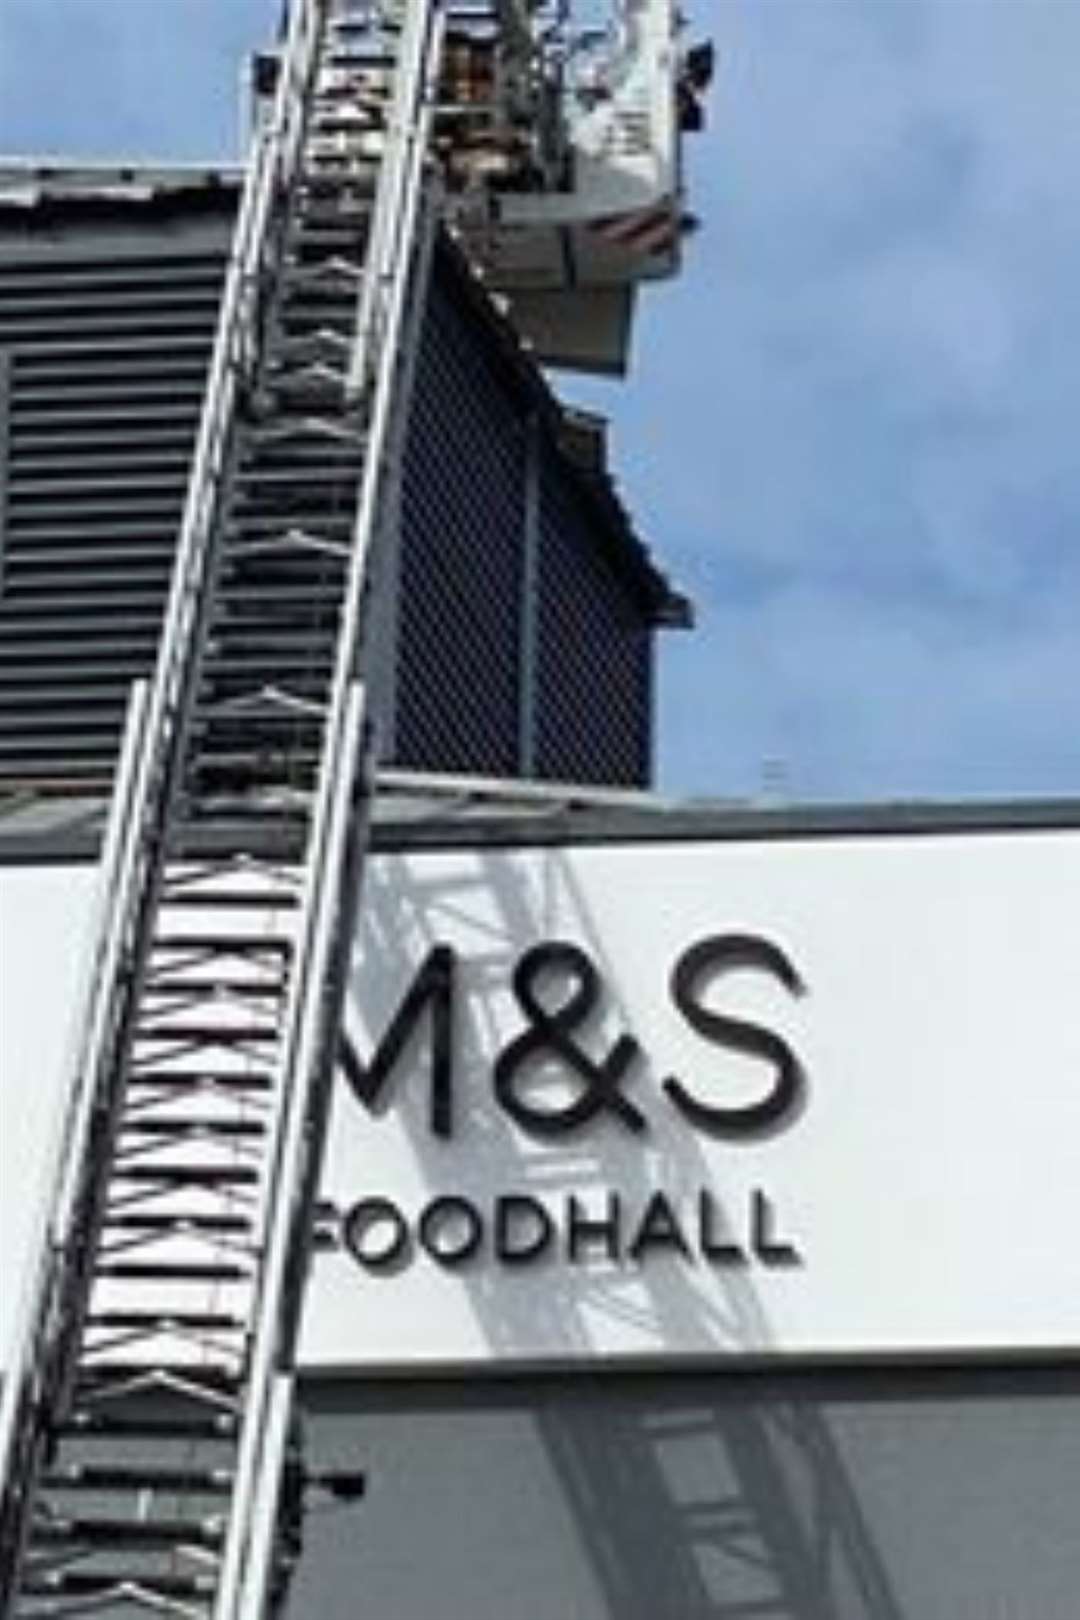 The roof panel appears to have been dangling from the roof of the M&S Foodhall. Picture: David Joseph Wright